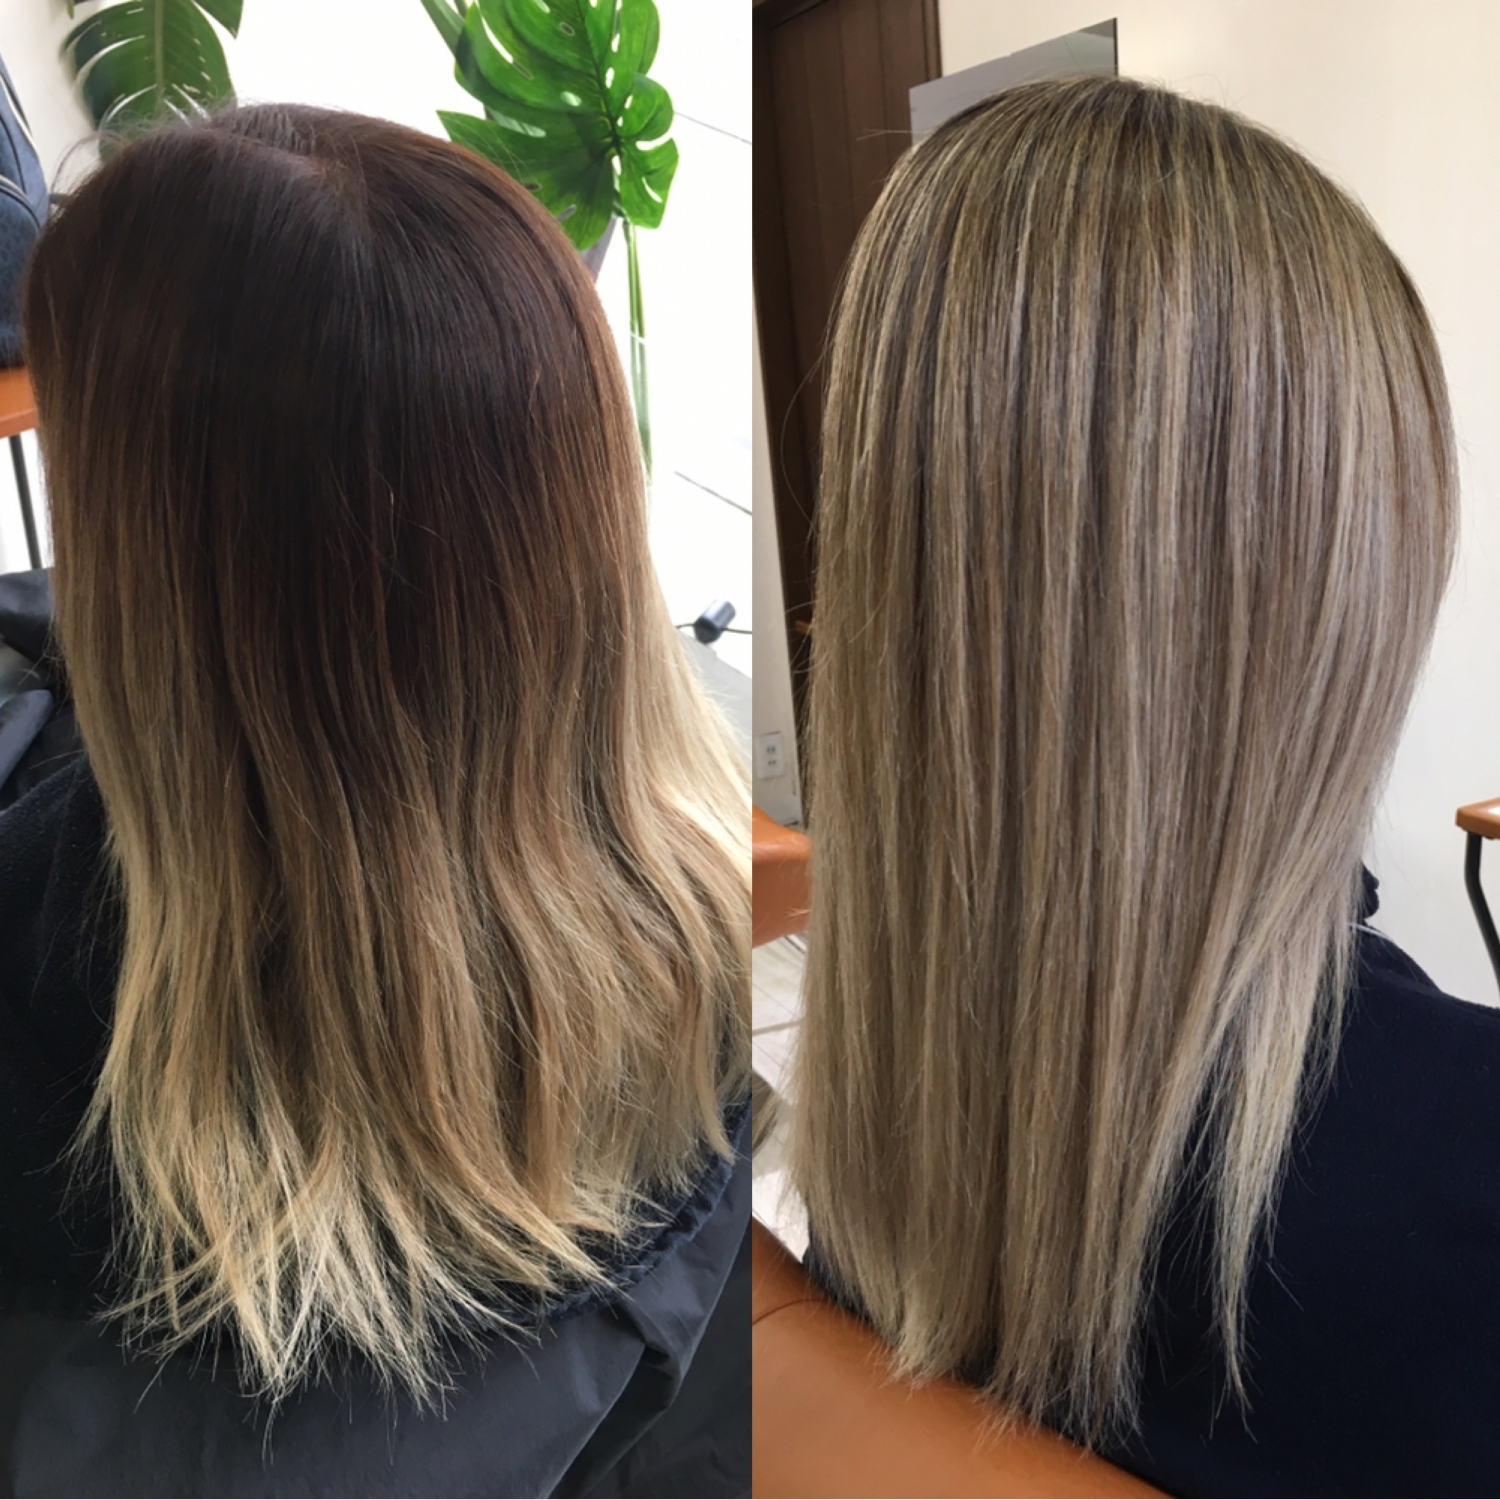 Ashy blonde highlights touch up work (Omotesando store SHO)